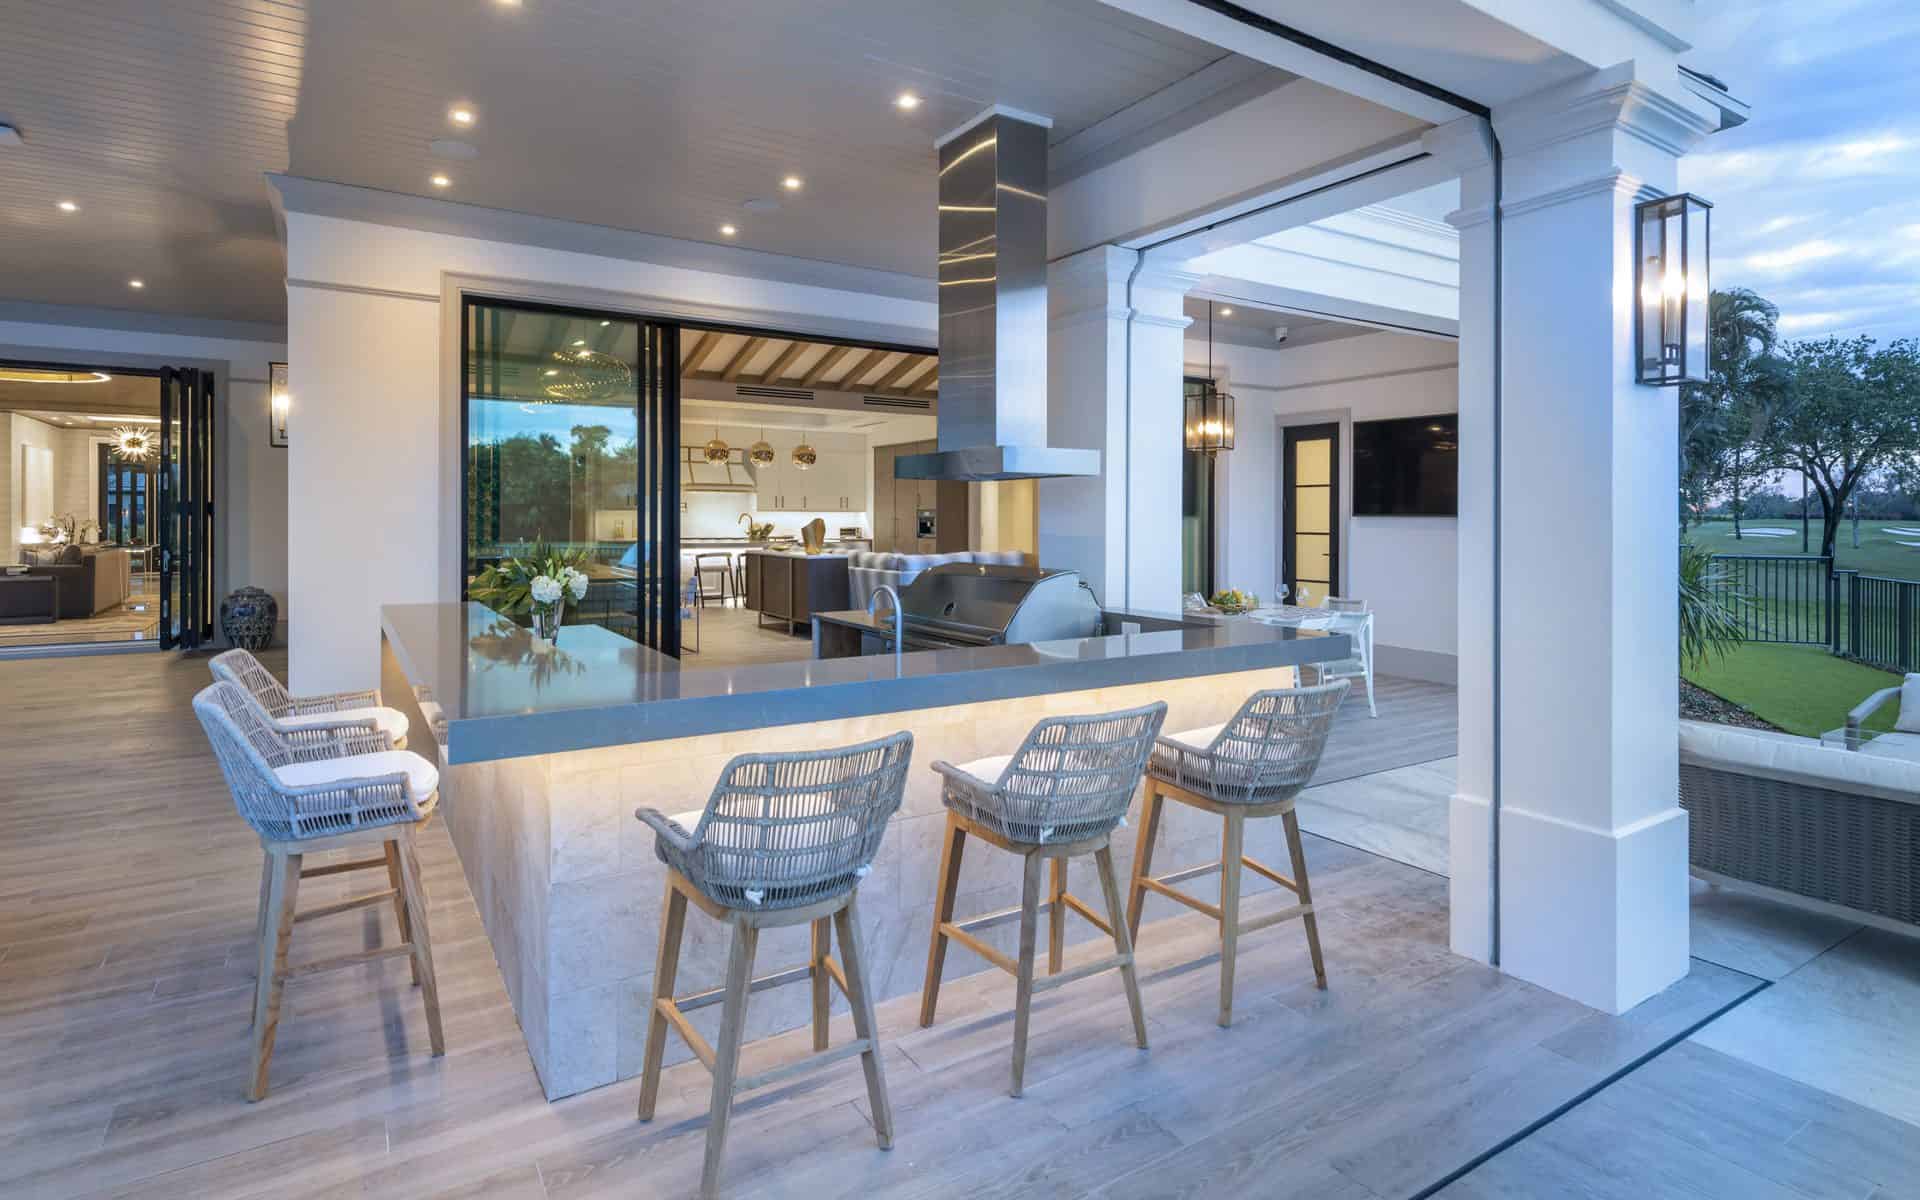 Stunning poolside patio features custom wrap-around bar with silver hoodvent and range.